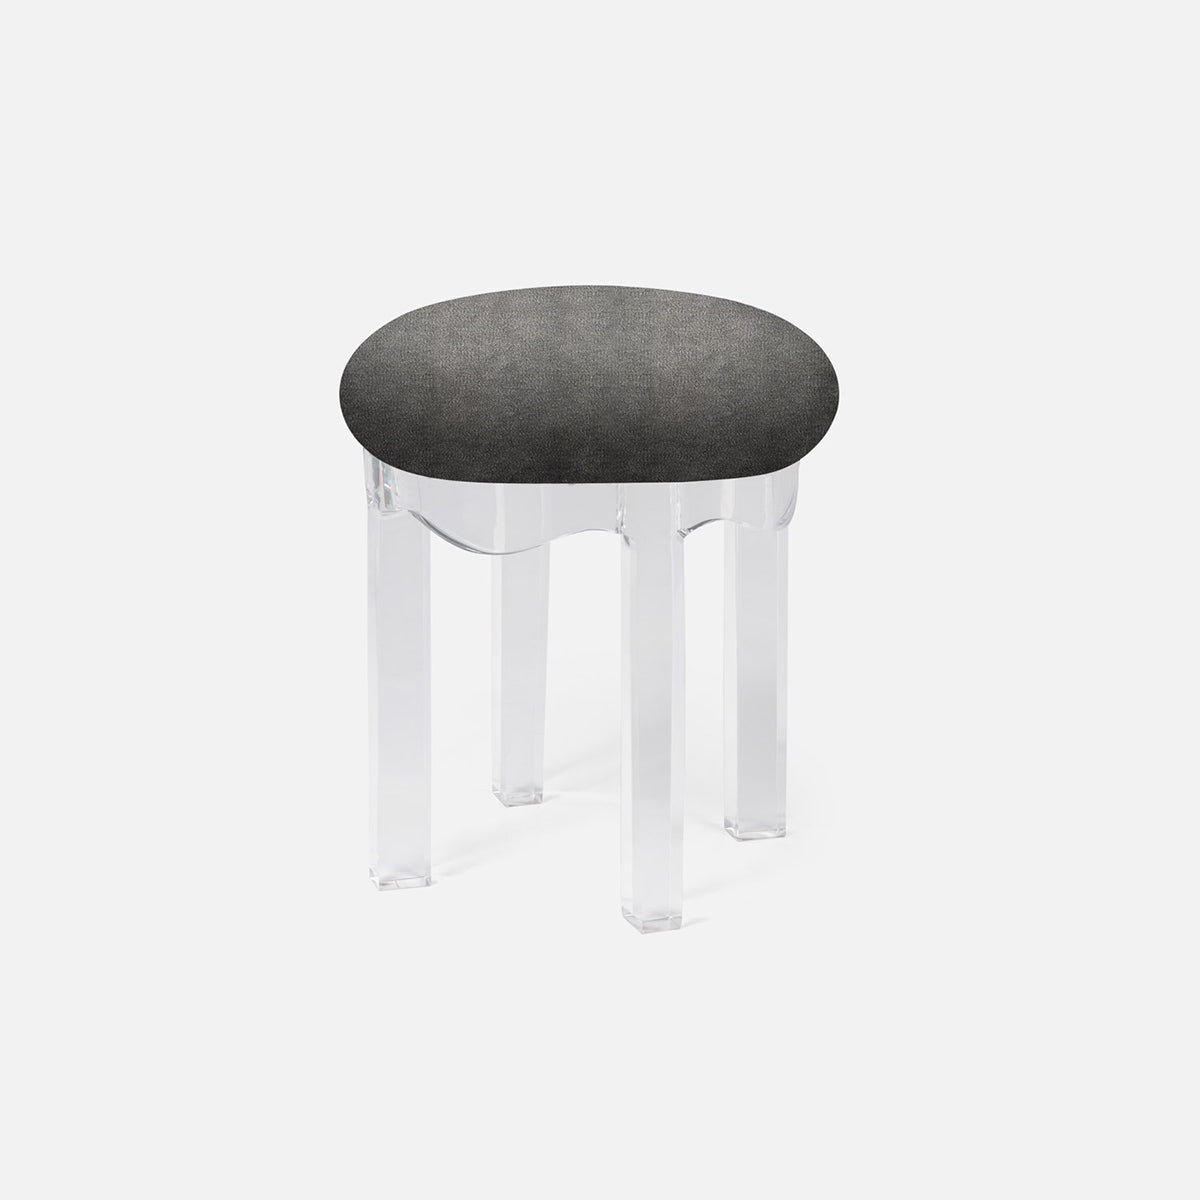 Made Goods Marston Upholstered Round Single Bench in Nile Fabric